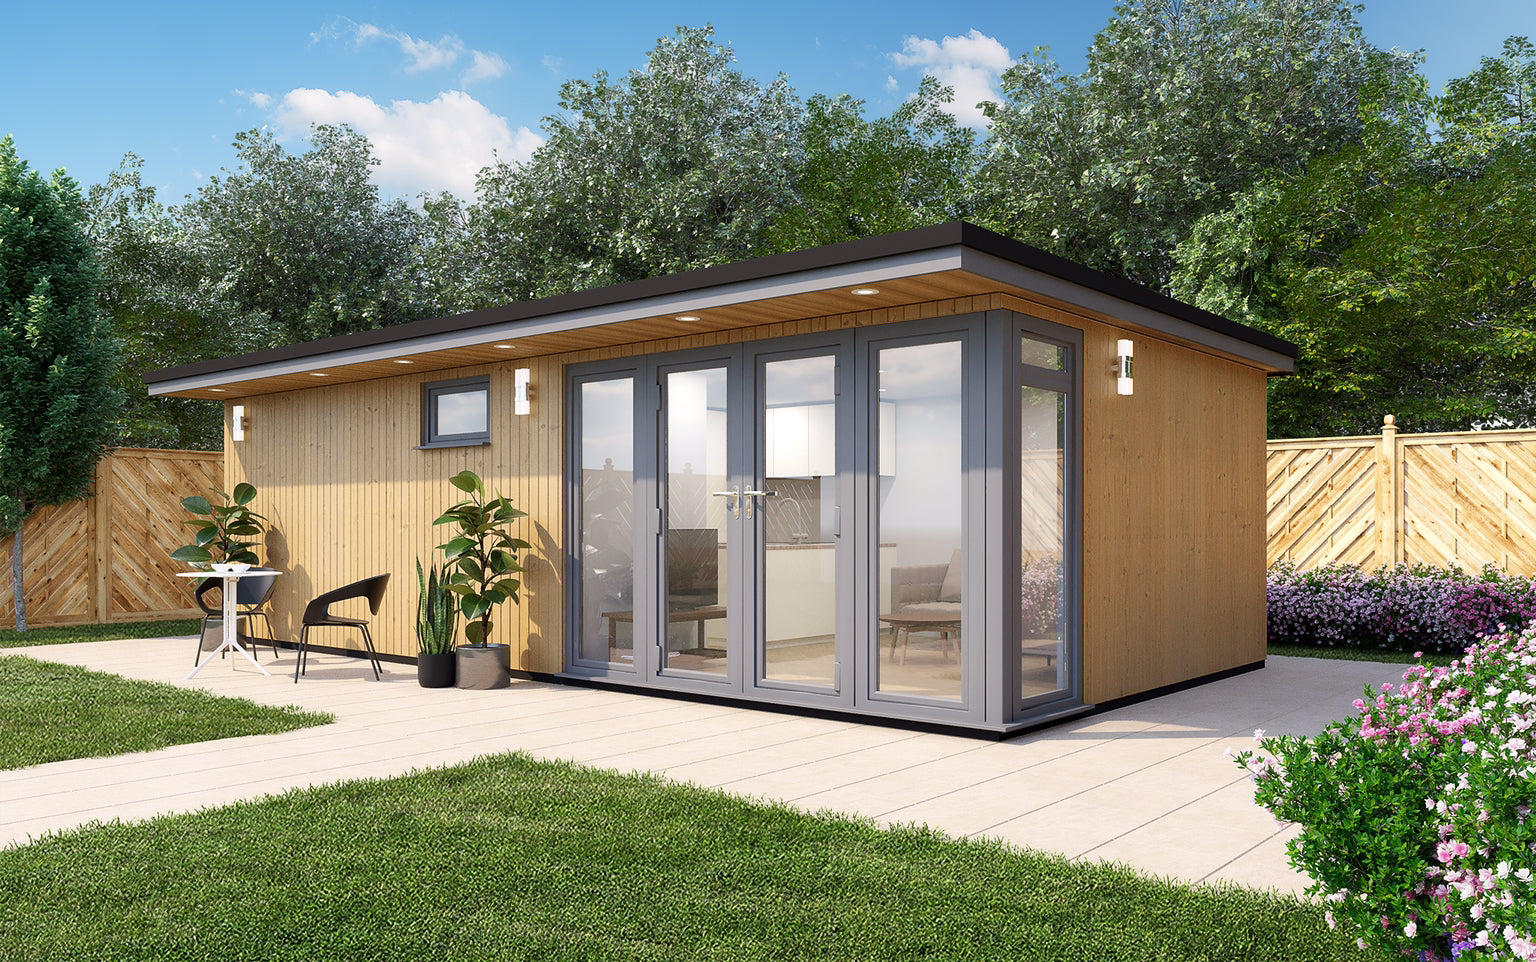 Modern Annexe Style Bespoke with large glass doors, situated in a well-manicured backyard designed for independent living by Rubicon Garden Rooms.